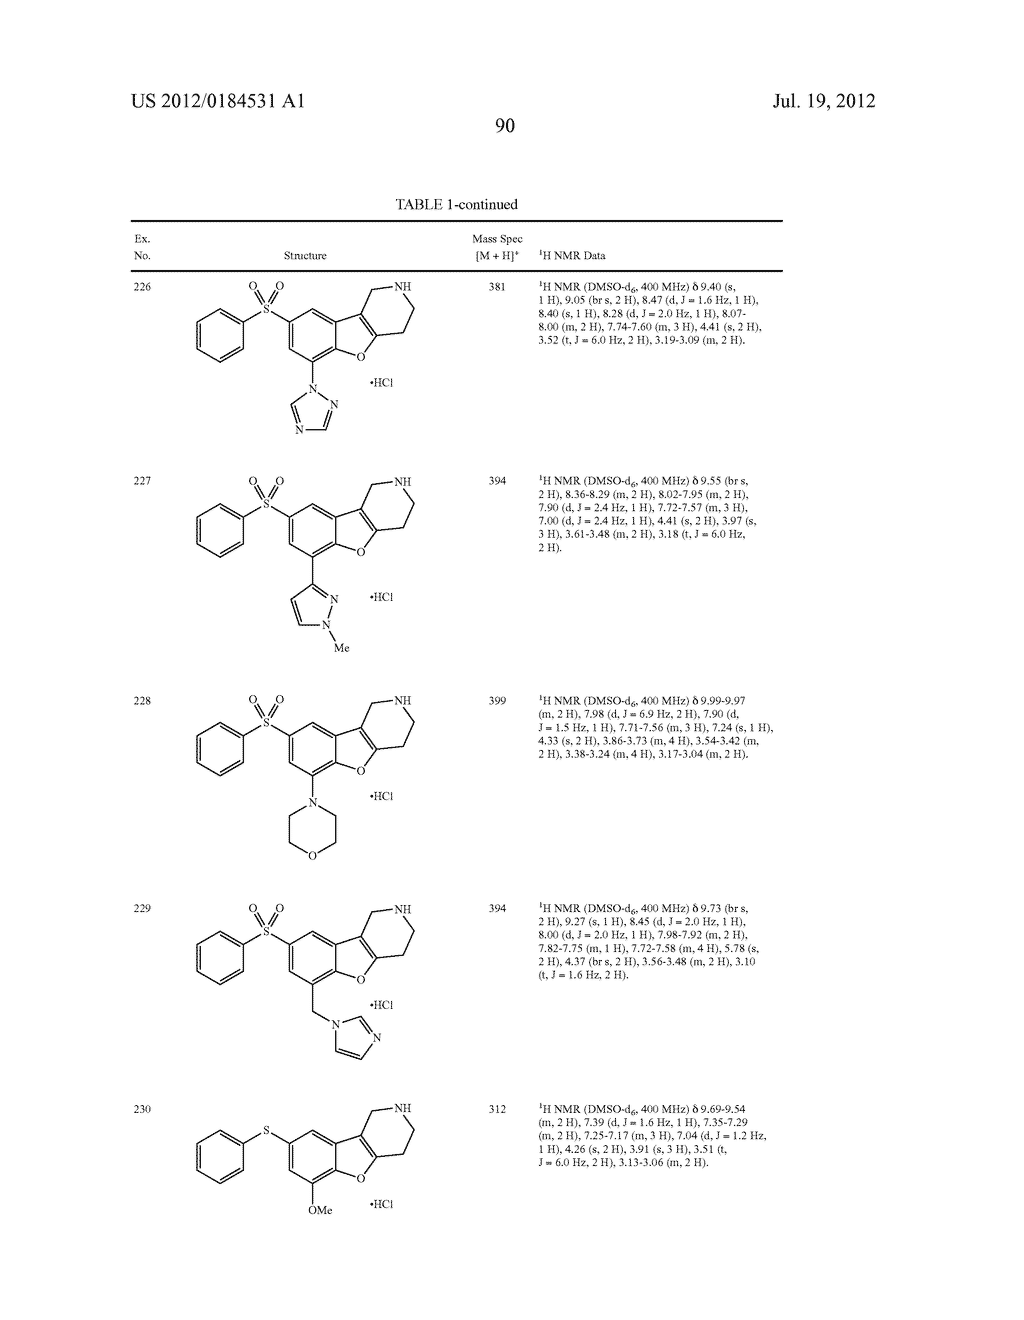 BENZOFURO[3,2-c] PYRIDINES AND RELATED ANALOGS AS SEROTONIN SUB-TYPE 6     (5-HT6) MODULATORS FOR THE TREATMENT OF OBESITY, METABOLIC SYNDROME,     COGNITION AND SCHIZOPHRENIA - diagram, schematic, and image 91